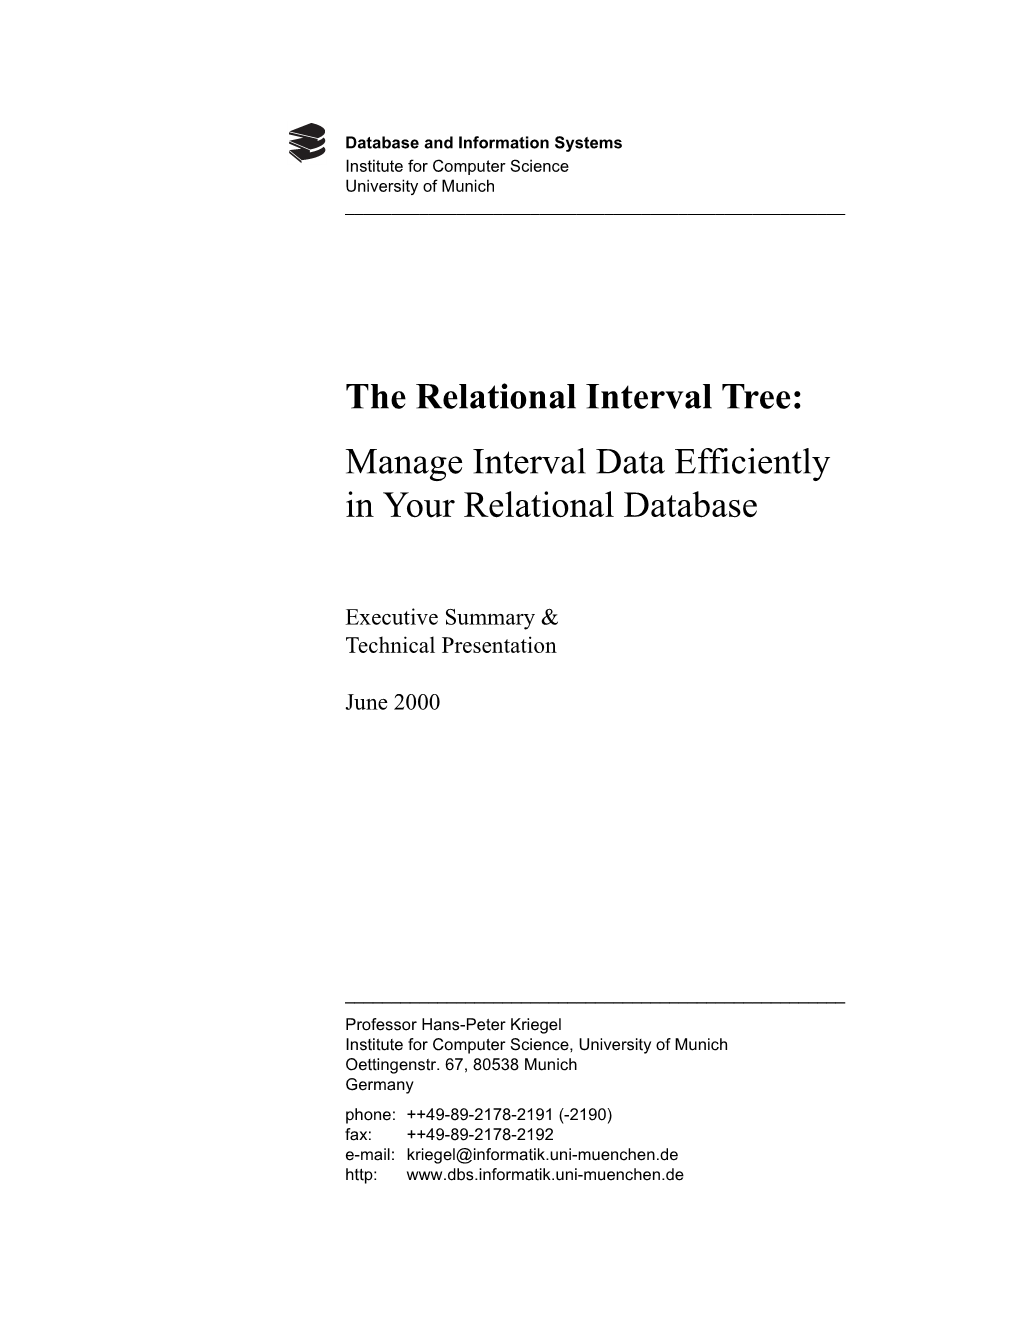 The Relational Interval Tree: Manage Interval Data Efficiently in Your Relational Database